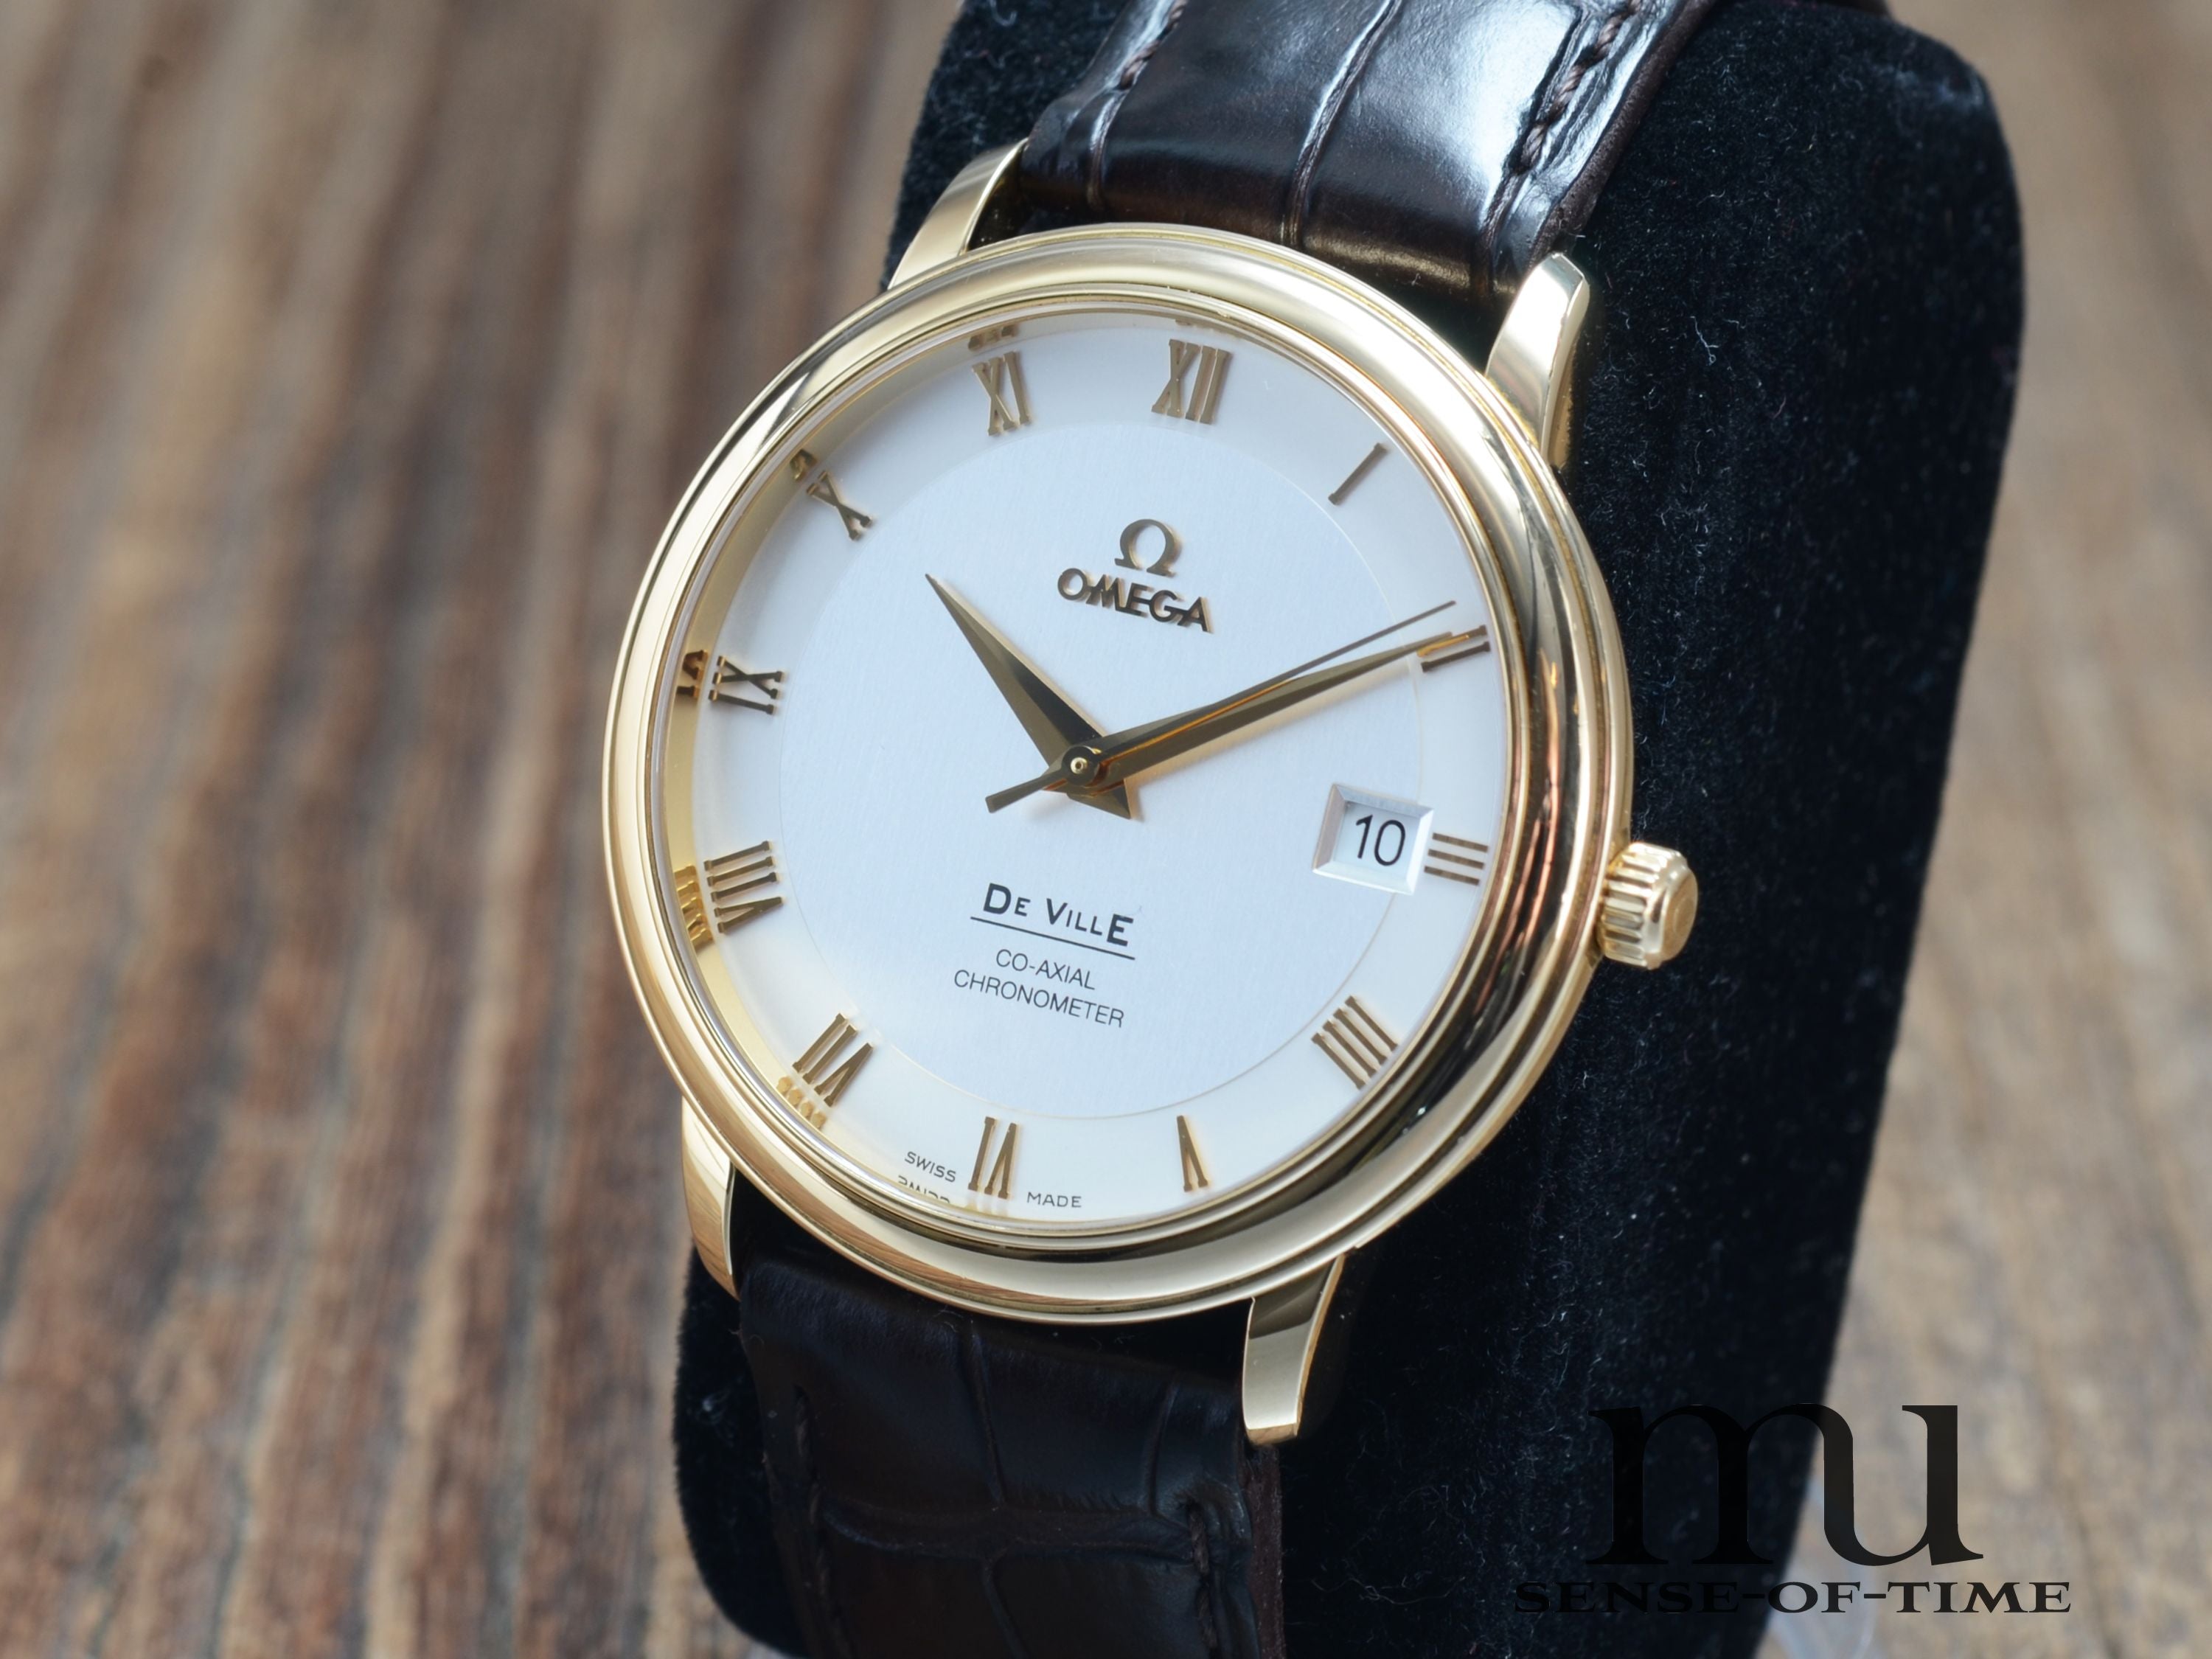 Omega deVille 18kt Gold Co-Axial Chronometer